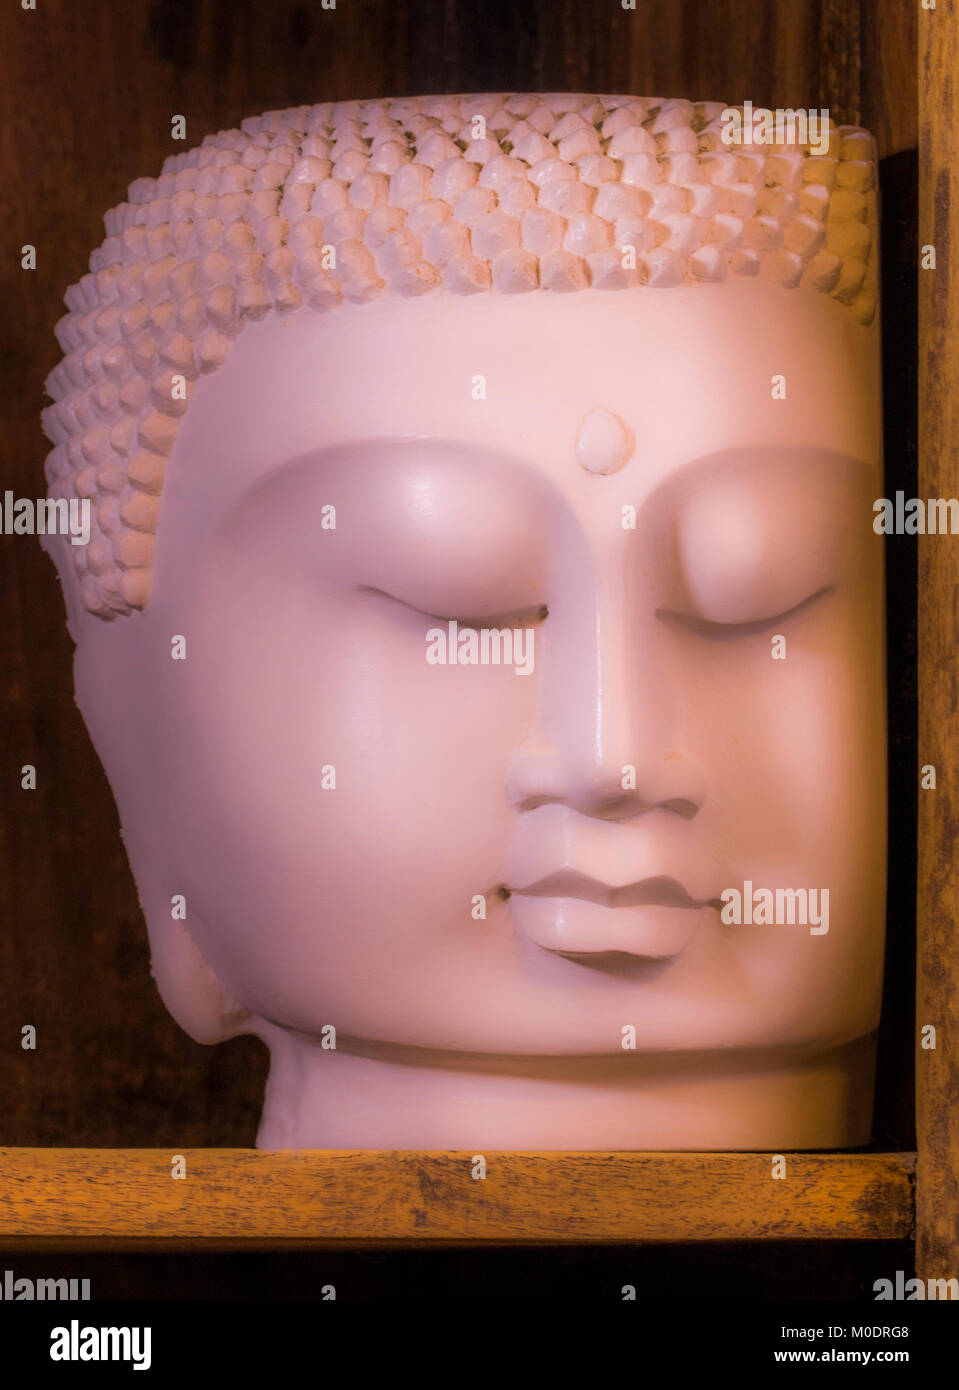 A beautiful, lifelike Buddha head ornament on display, with realistic facial features and eyes closed as if in contemplation. Made from plaster. Stock Photo